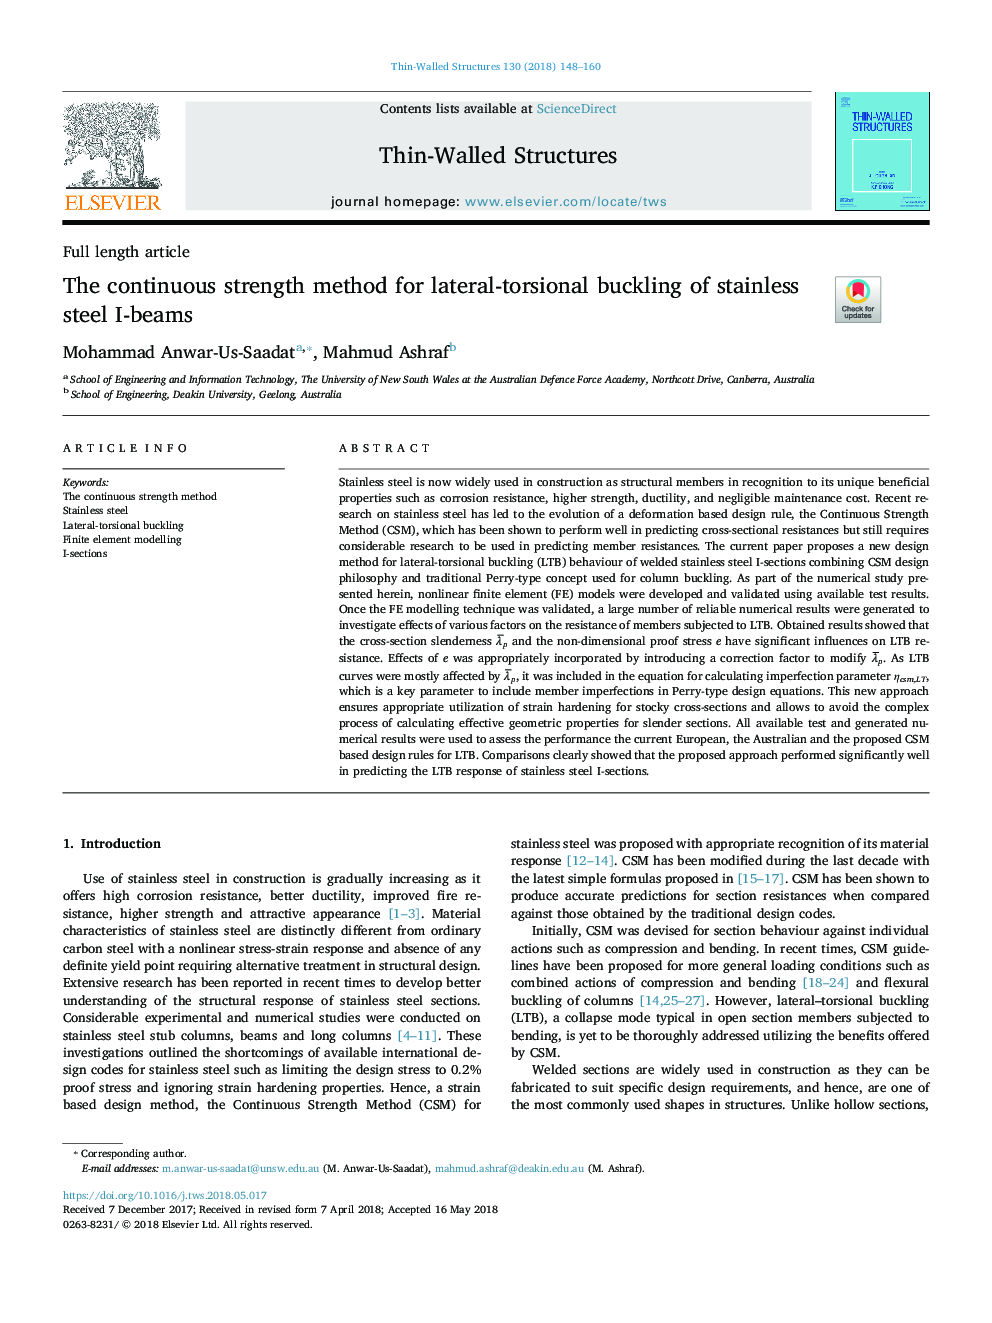 The continuous strength method for lateral-torsional buckling of stainless steel I-beams